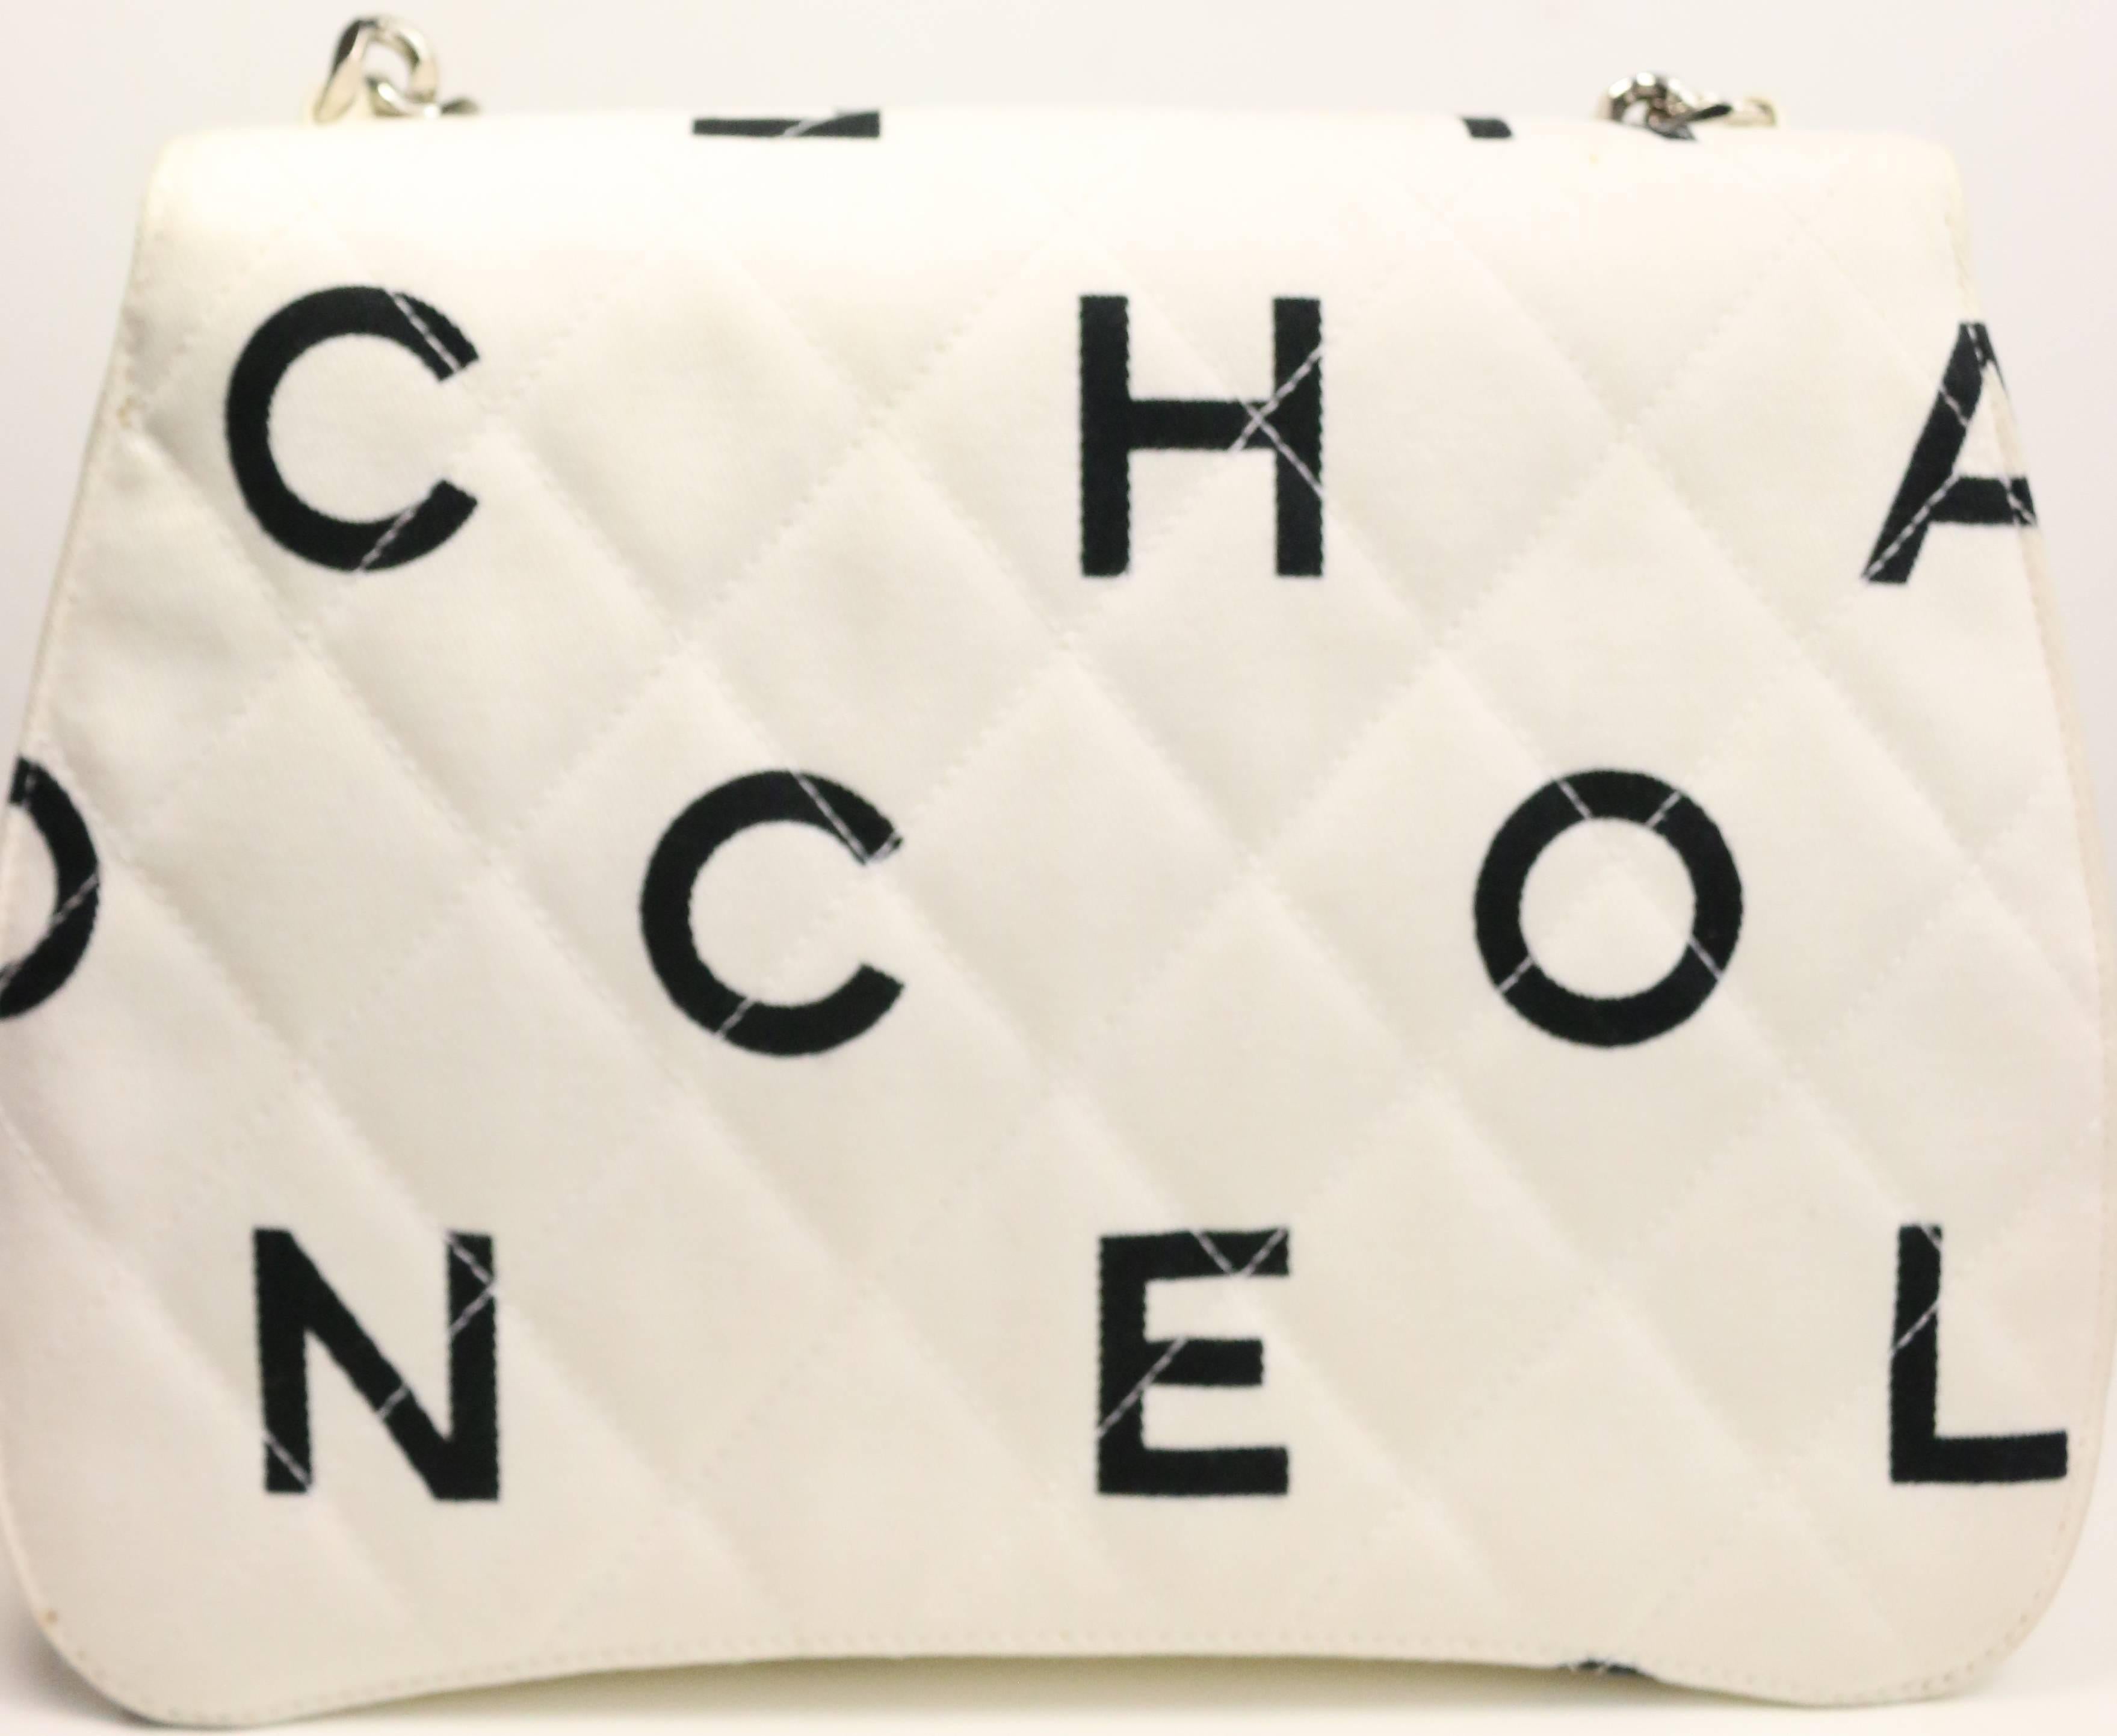 - Vintage 90s Chanel white quilted with black logo print canvas flap bag and accentuated with a silver hardware strap from Chanel circa 1996- 1997. Featuring leather interior zipper and patch pockets. 

- Made in France. 

- Includes: Authenticity